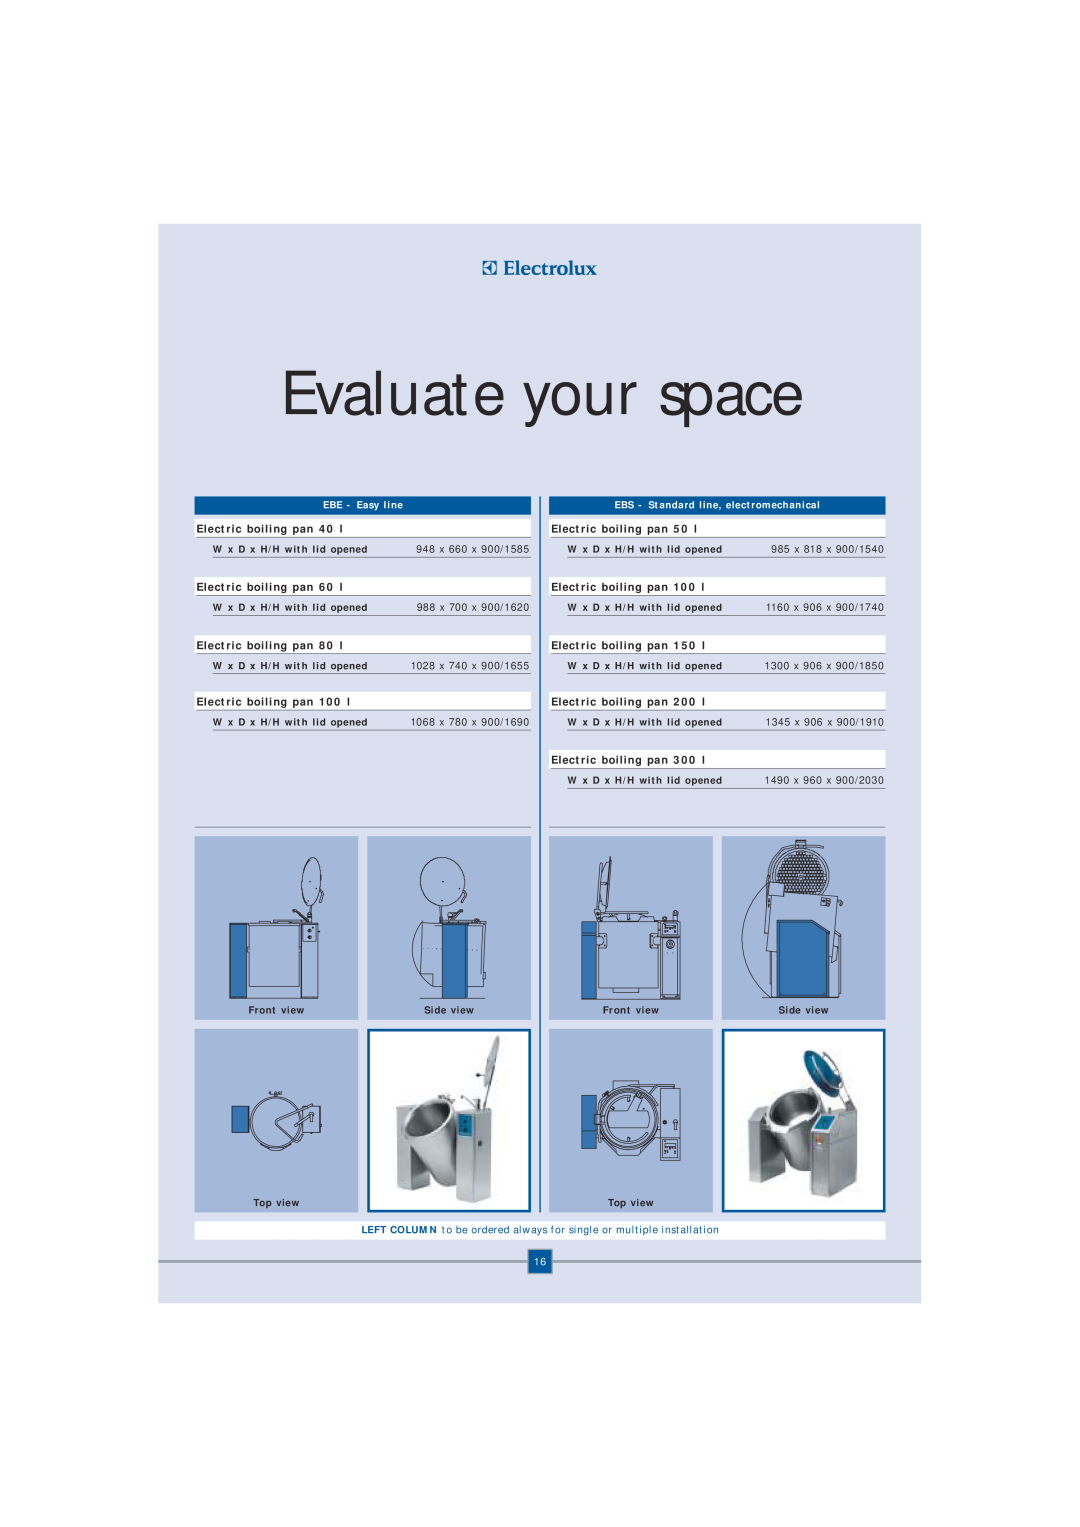 Electrolux Fryer manual Evaluate your space, EBE - Easy line, EBS - Standard line, electromechanical 